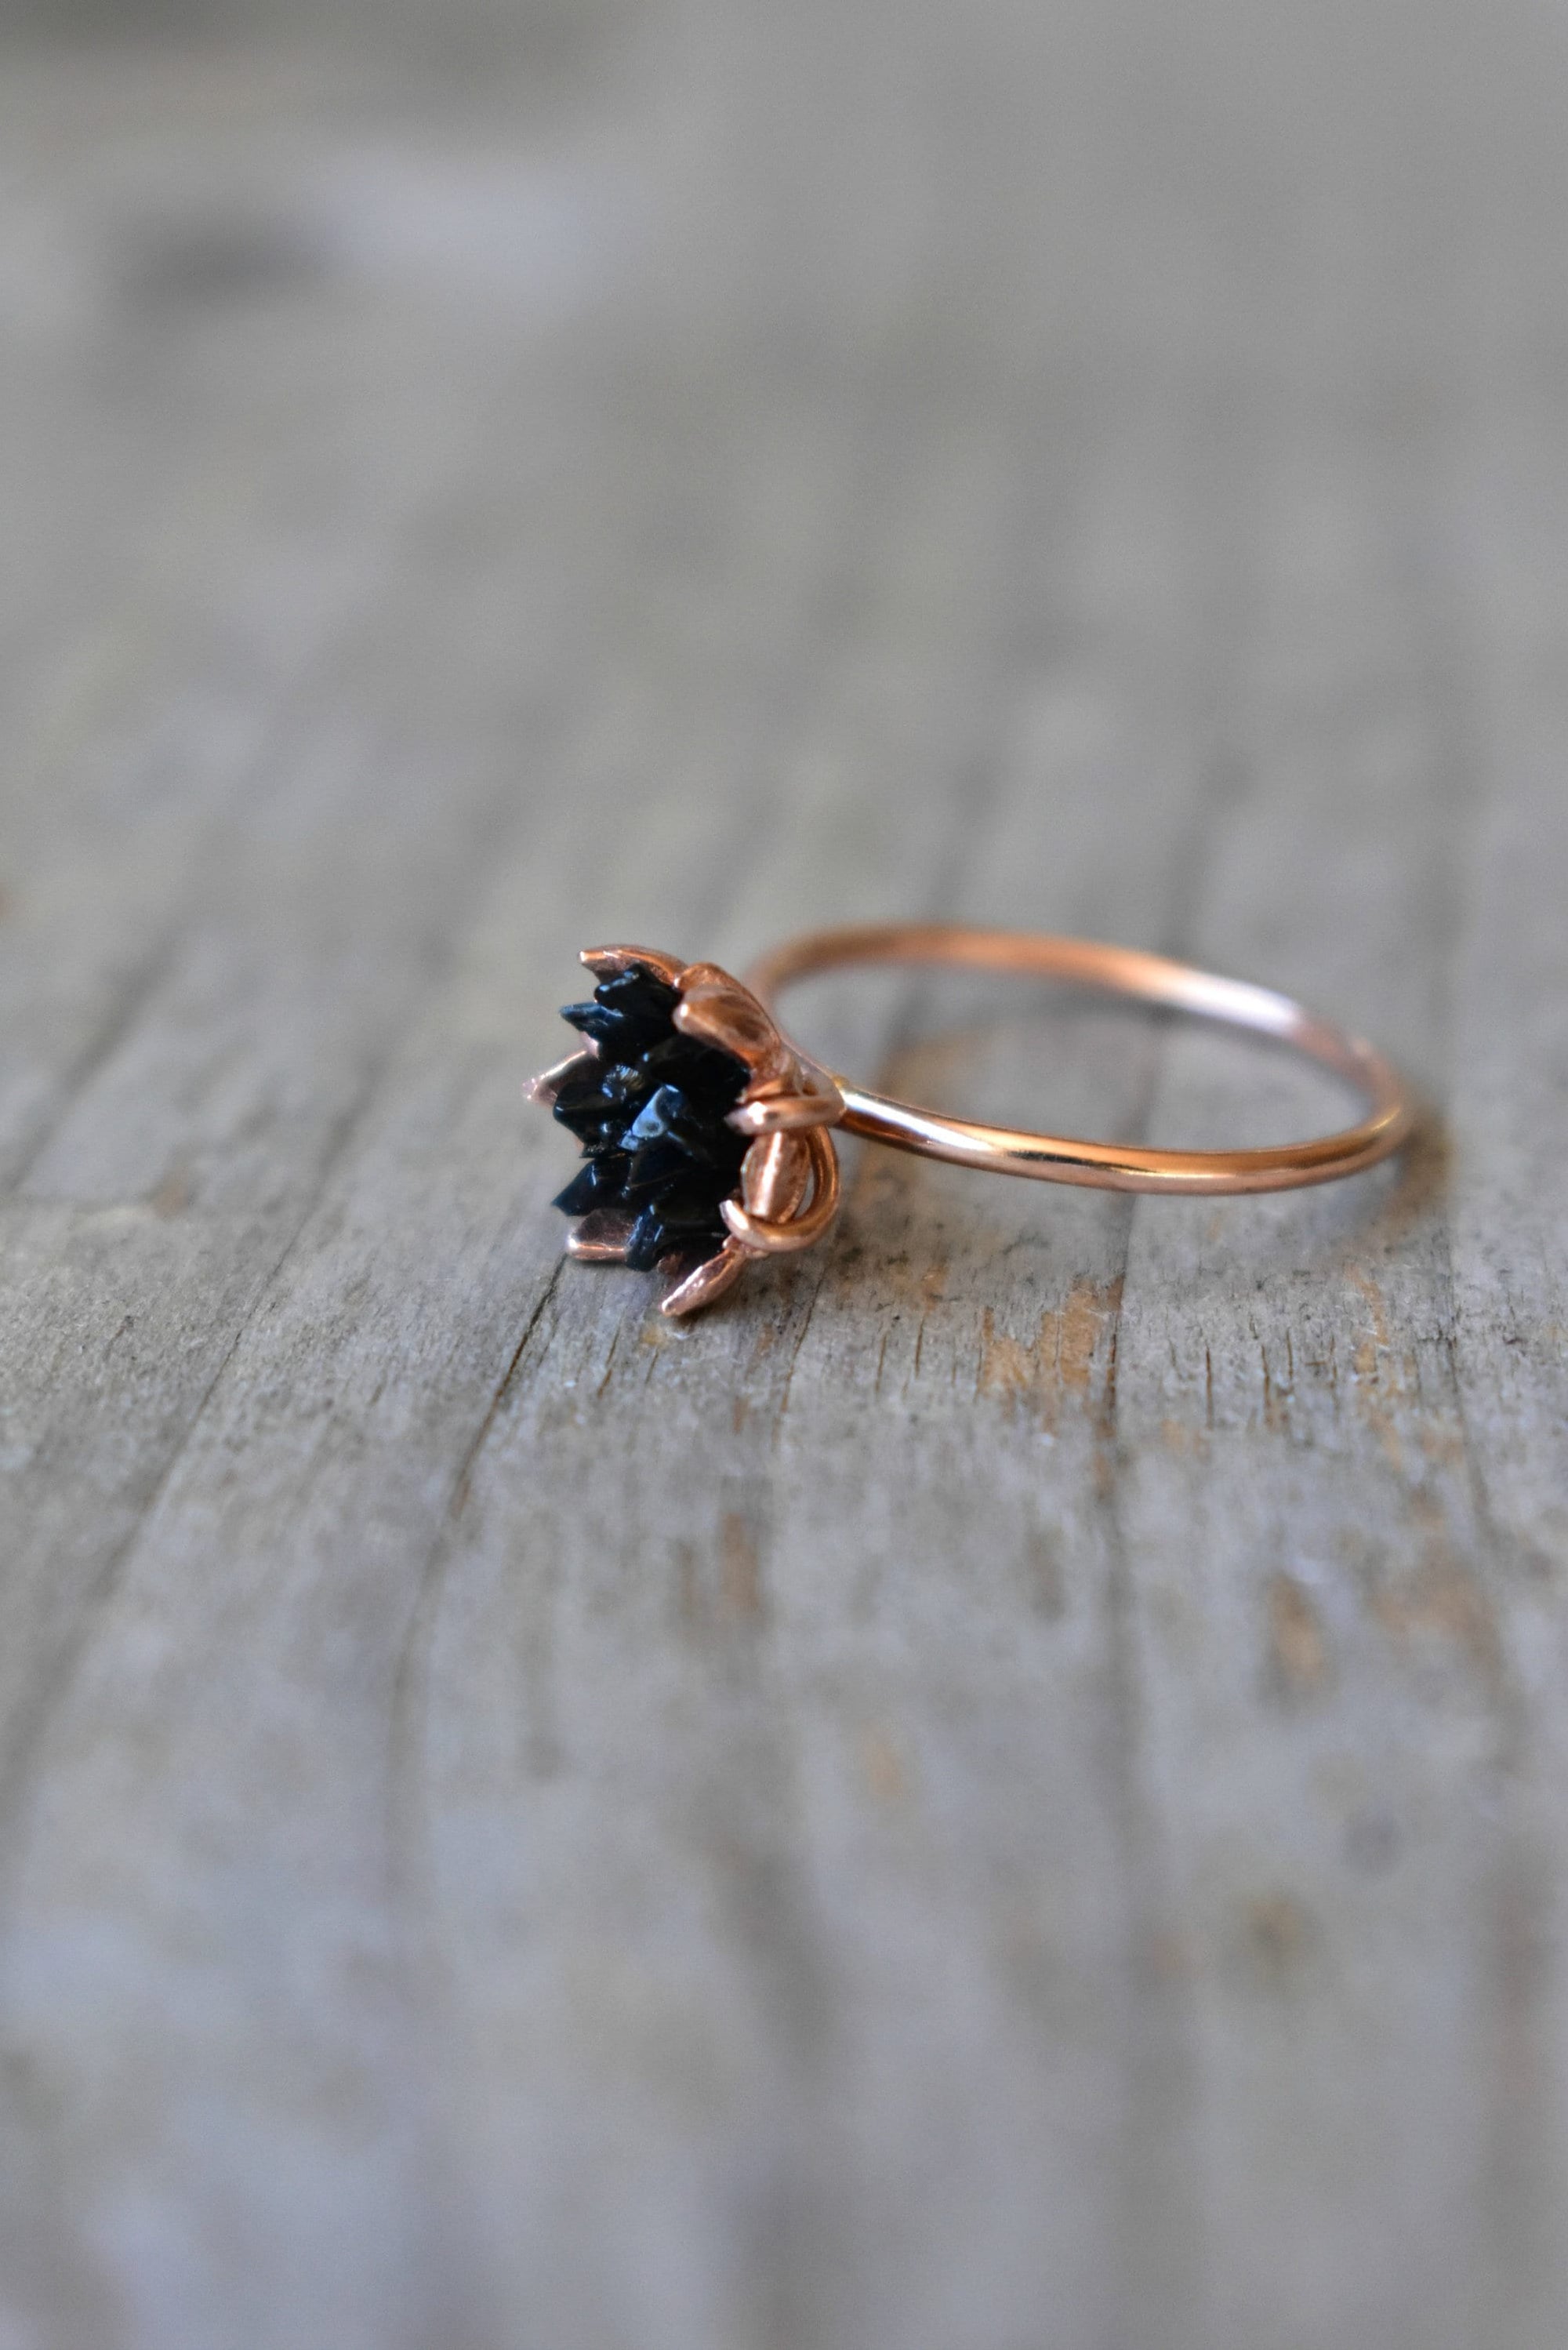 Black Tourmaline Ring, Multi Stone Jewelry in 14K Rose Gold, Lotus Flower Ring Trending on Etsy, Black and Gold, Modern Crystal Valentine's